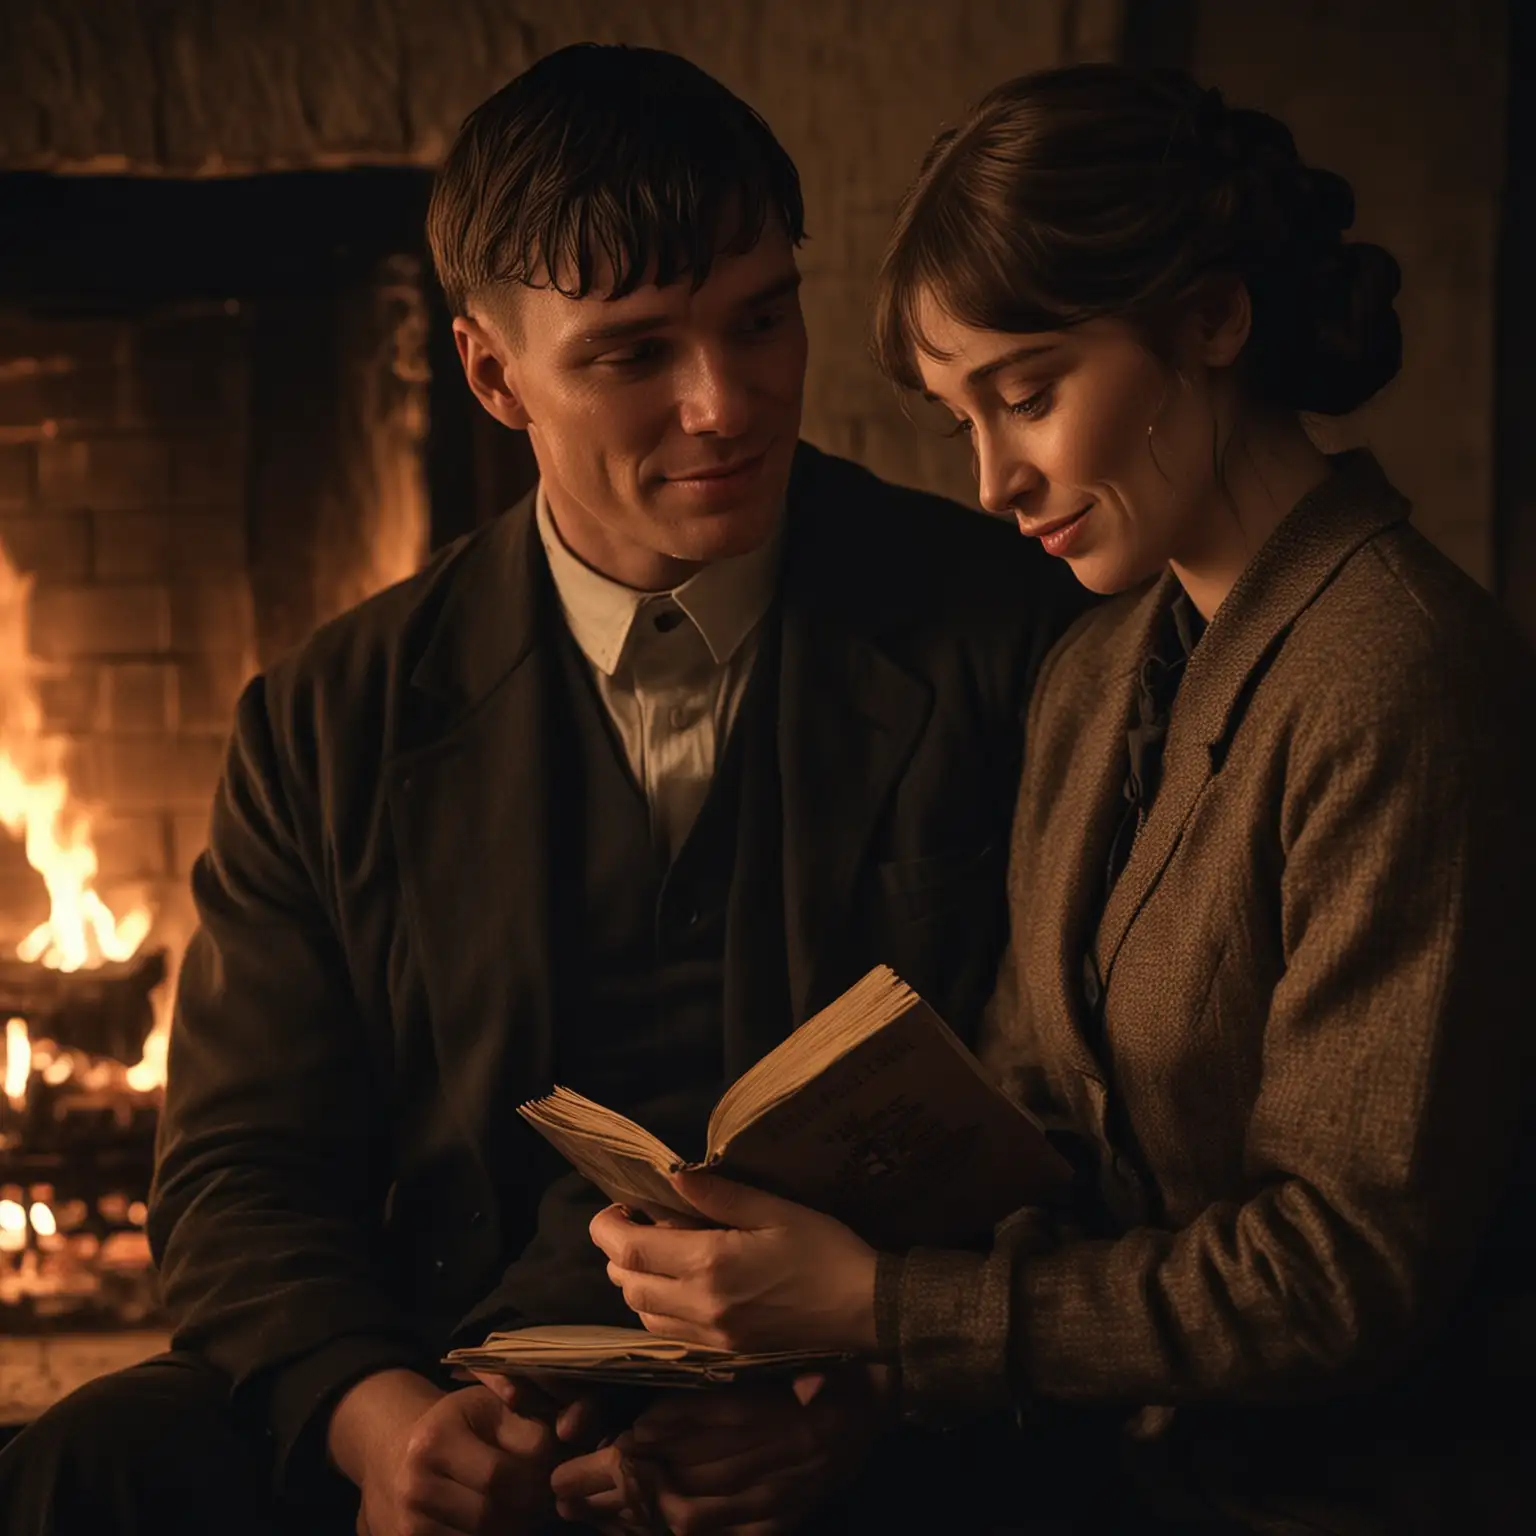 Tommy Shelby and Lizzie Shelby sit by a warm fireplace, their faces illuminated by the firelight. They are both dressed comfortably, with no pretense or masks. Tommy holds a book in his lap, but his gaze is fixed on Lizzie. She smiles softly back at him. The scene depicts the comfort and vulnerability found in a safe and accepting relationship